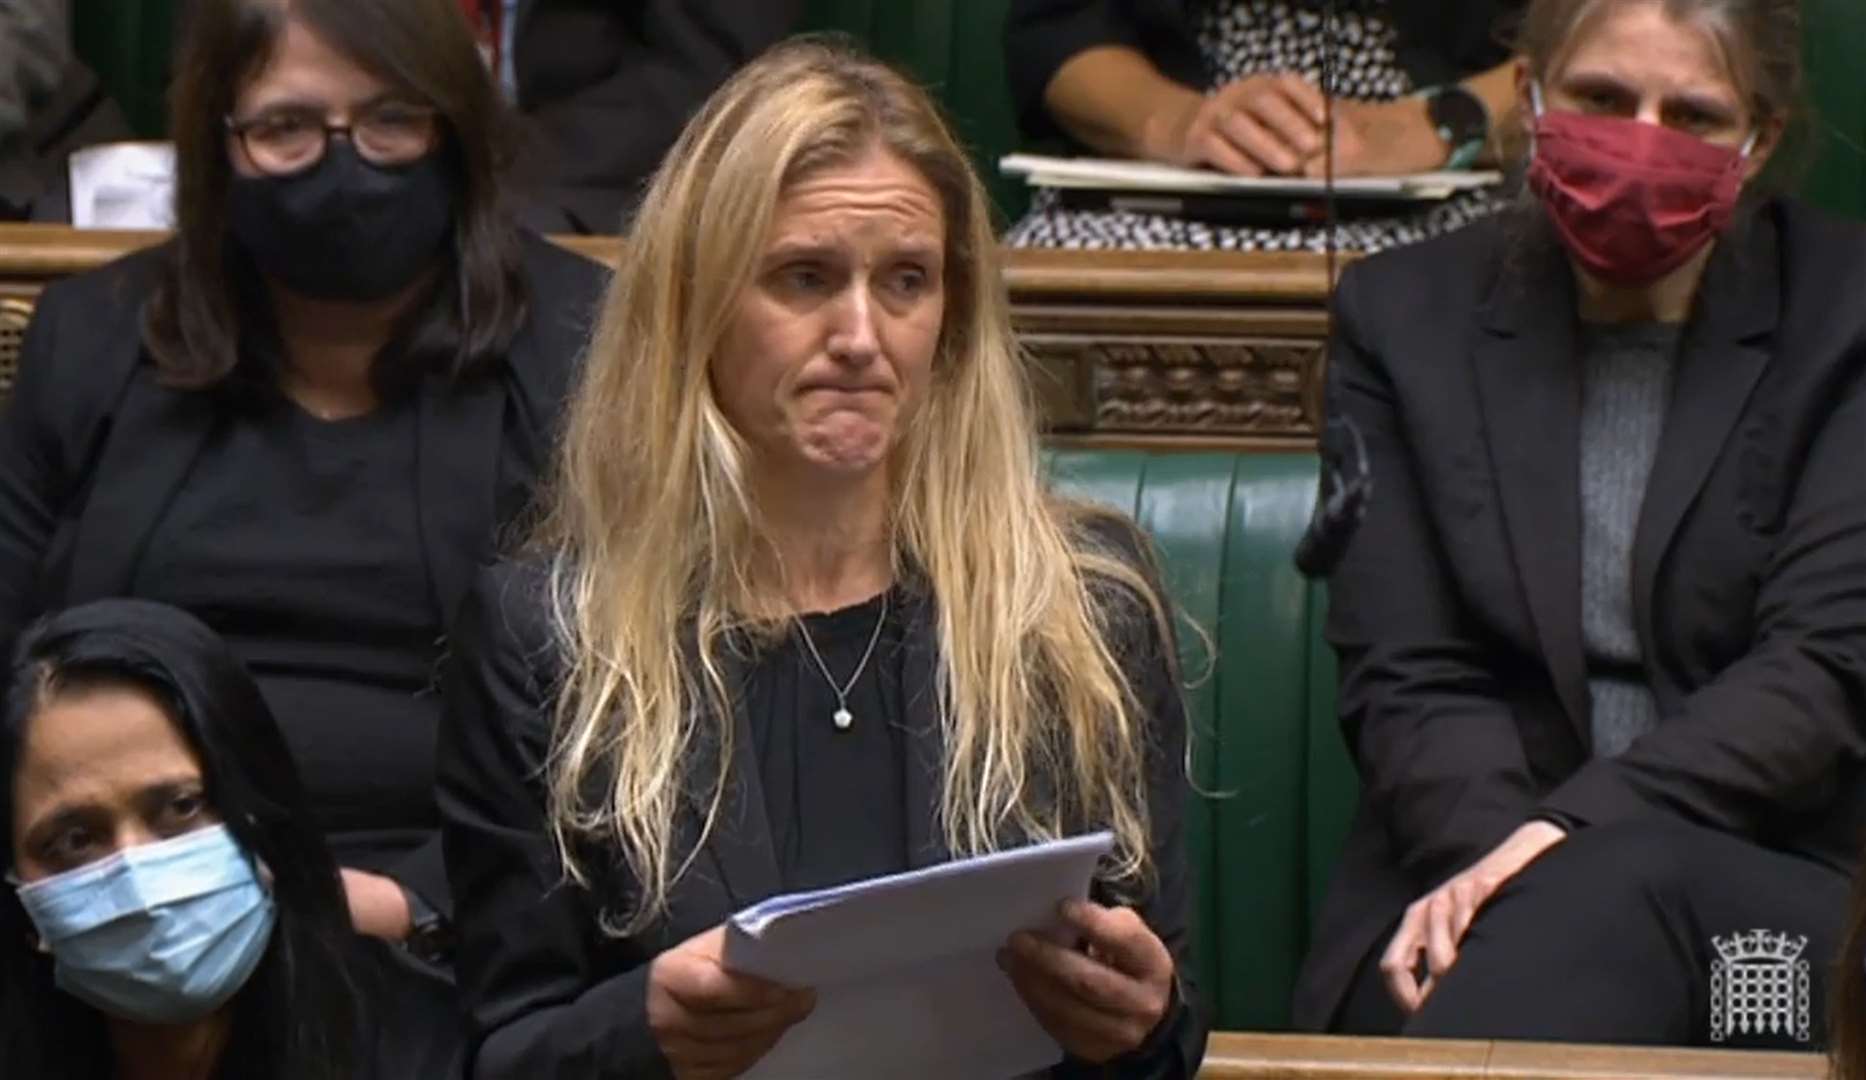 Labour Party MP Kim Leadbeater, the sister of Jo Cox, speaks in the House of Commons as MPs gather to pay tribute to Sir David Amess (House of Commons/PA)